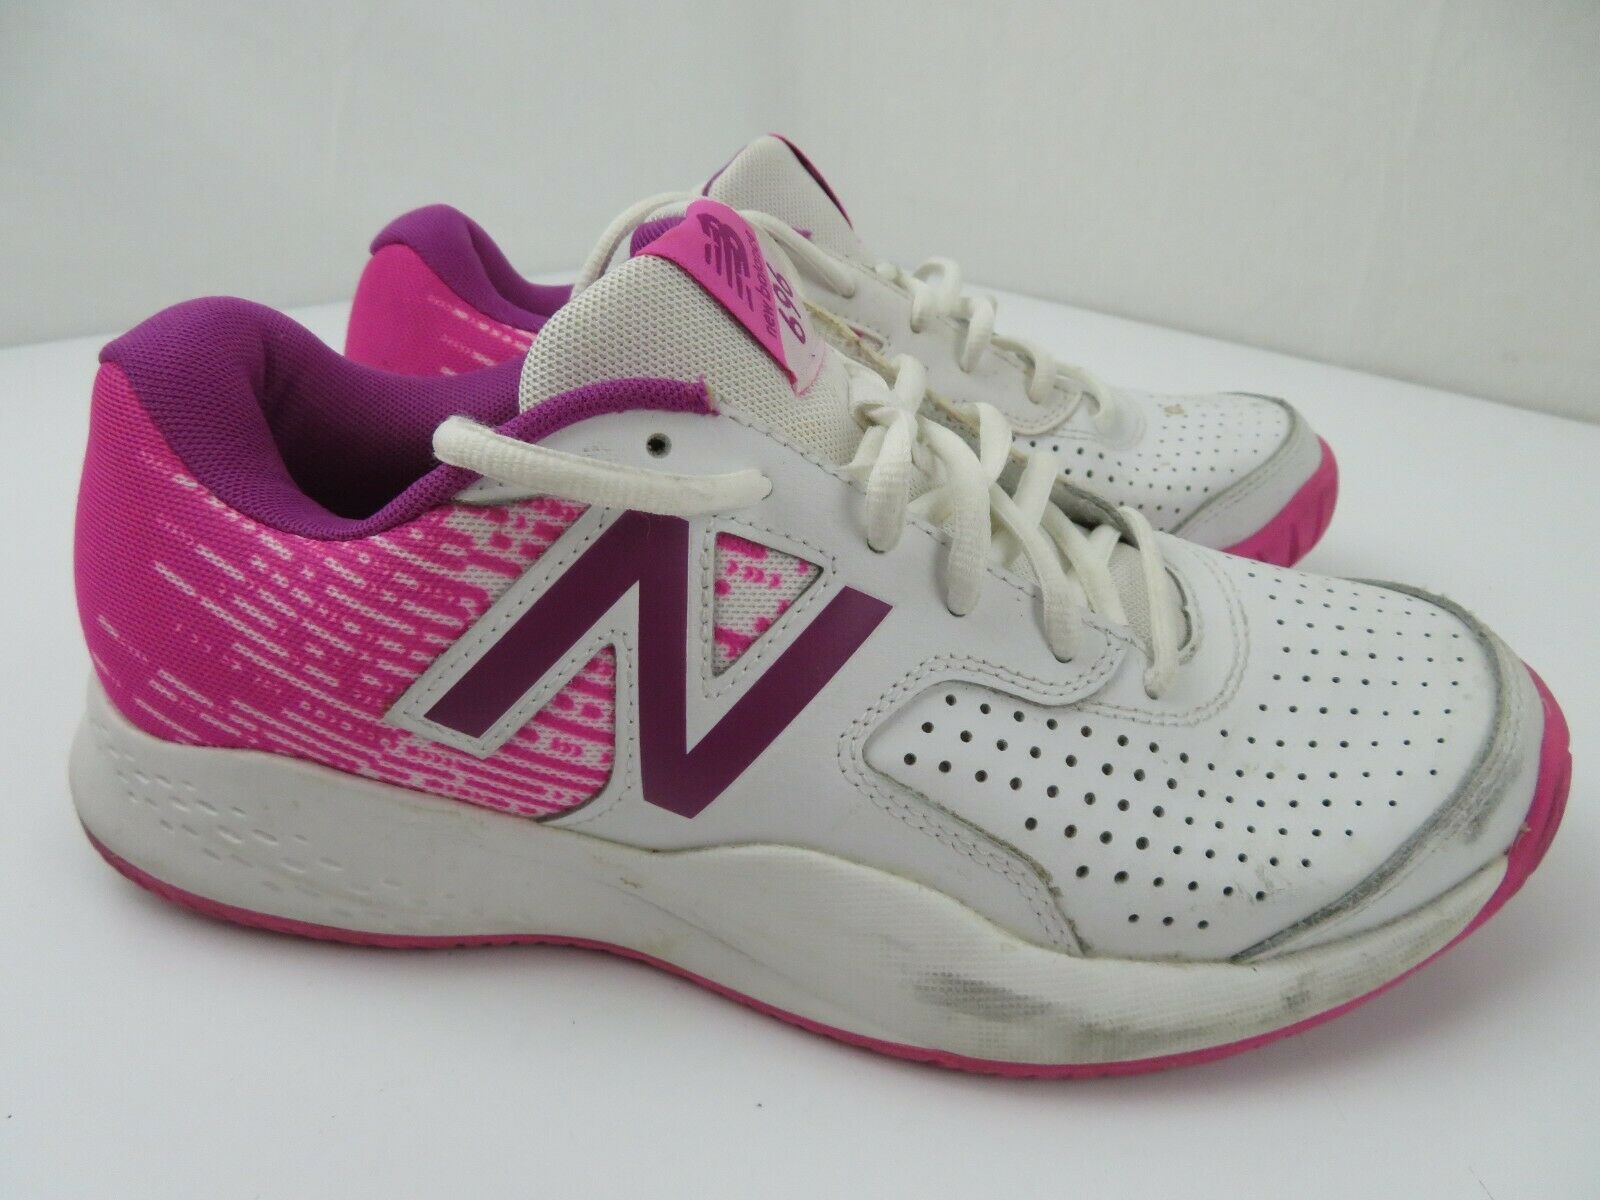 New Balance 696 Sneakers Women's Shoes Size 10 White Pink wc696wp3